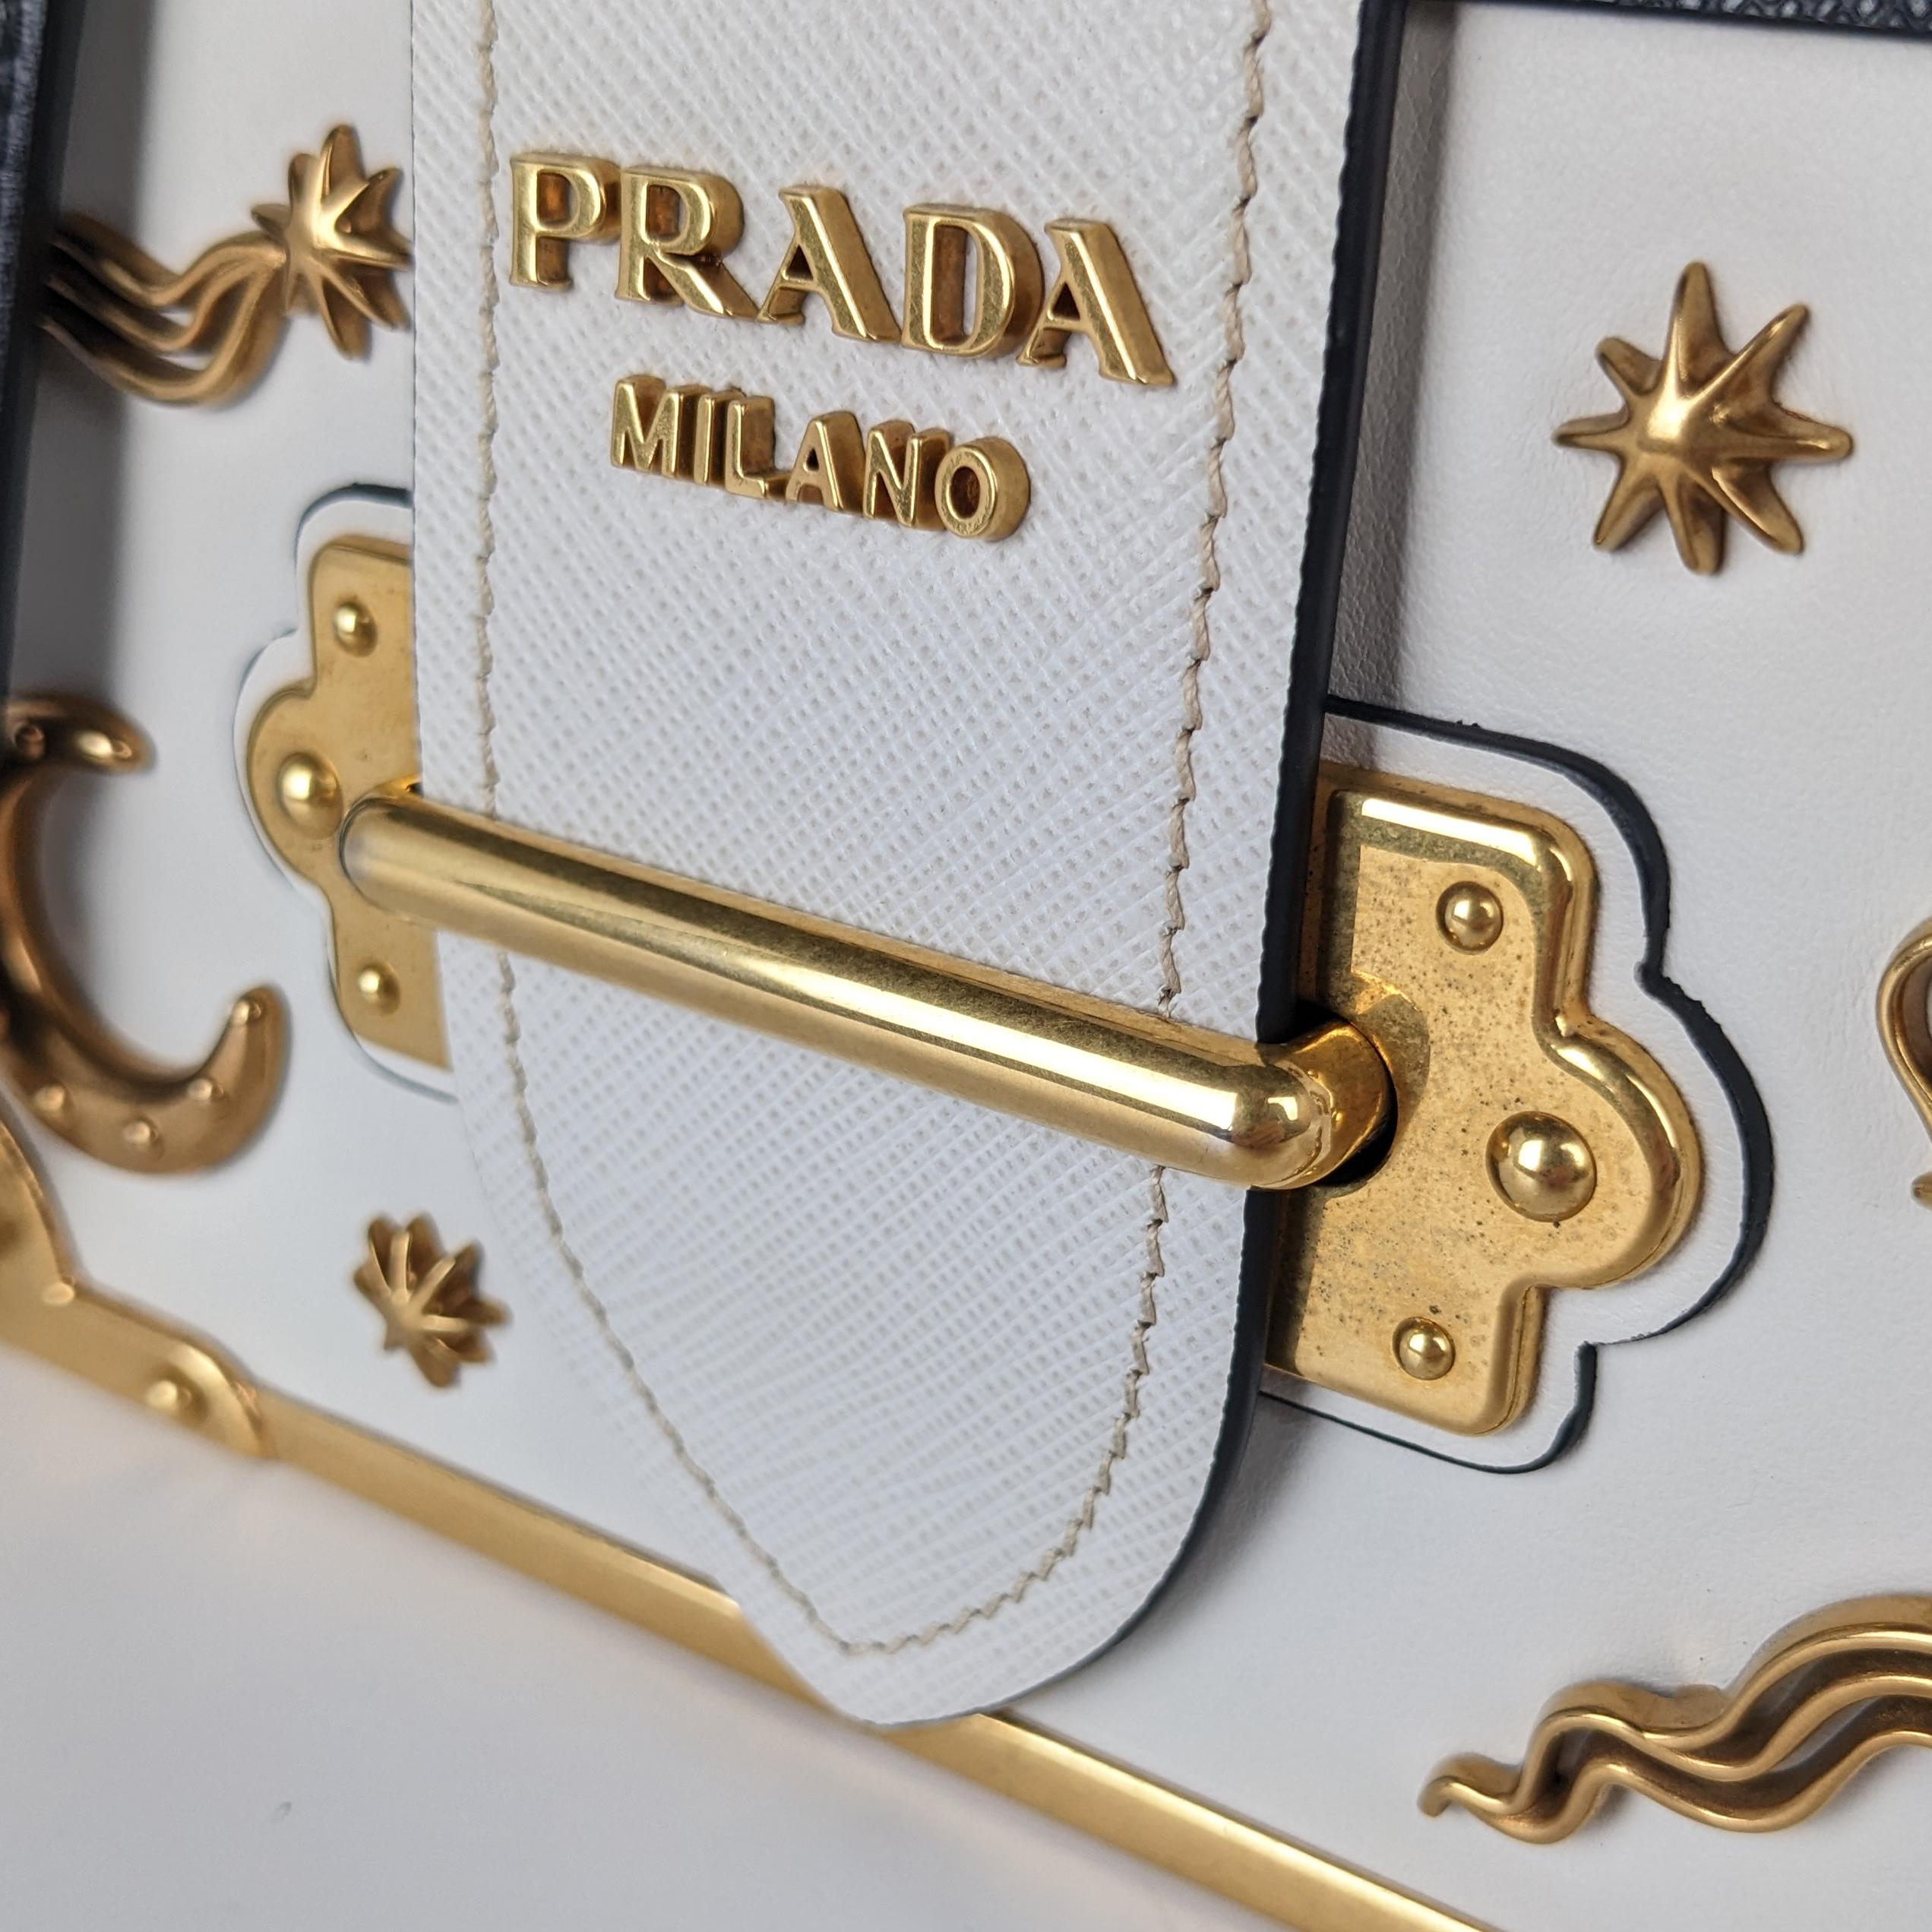 Condition: This authentic Prada bag is in great pre-loved condition. There is minor scratches/tarnishing to hardware, light marks under flap, and faint mark on back.

Est. Retail: $2900

Includes: Authenticity card

Features: Gold-tone